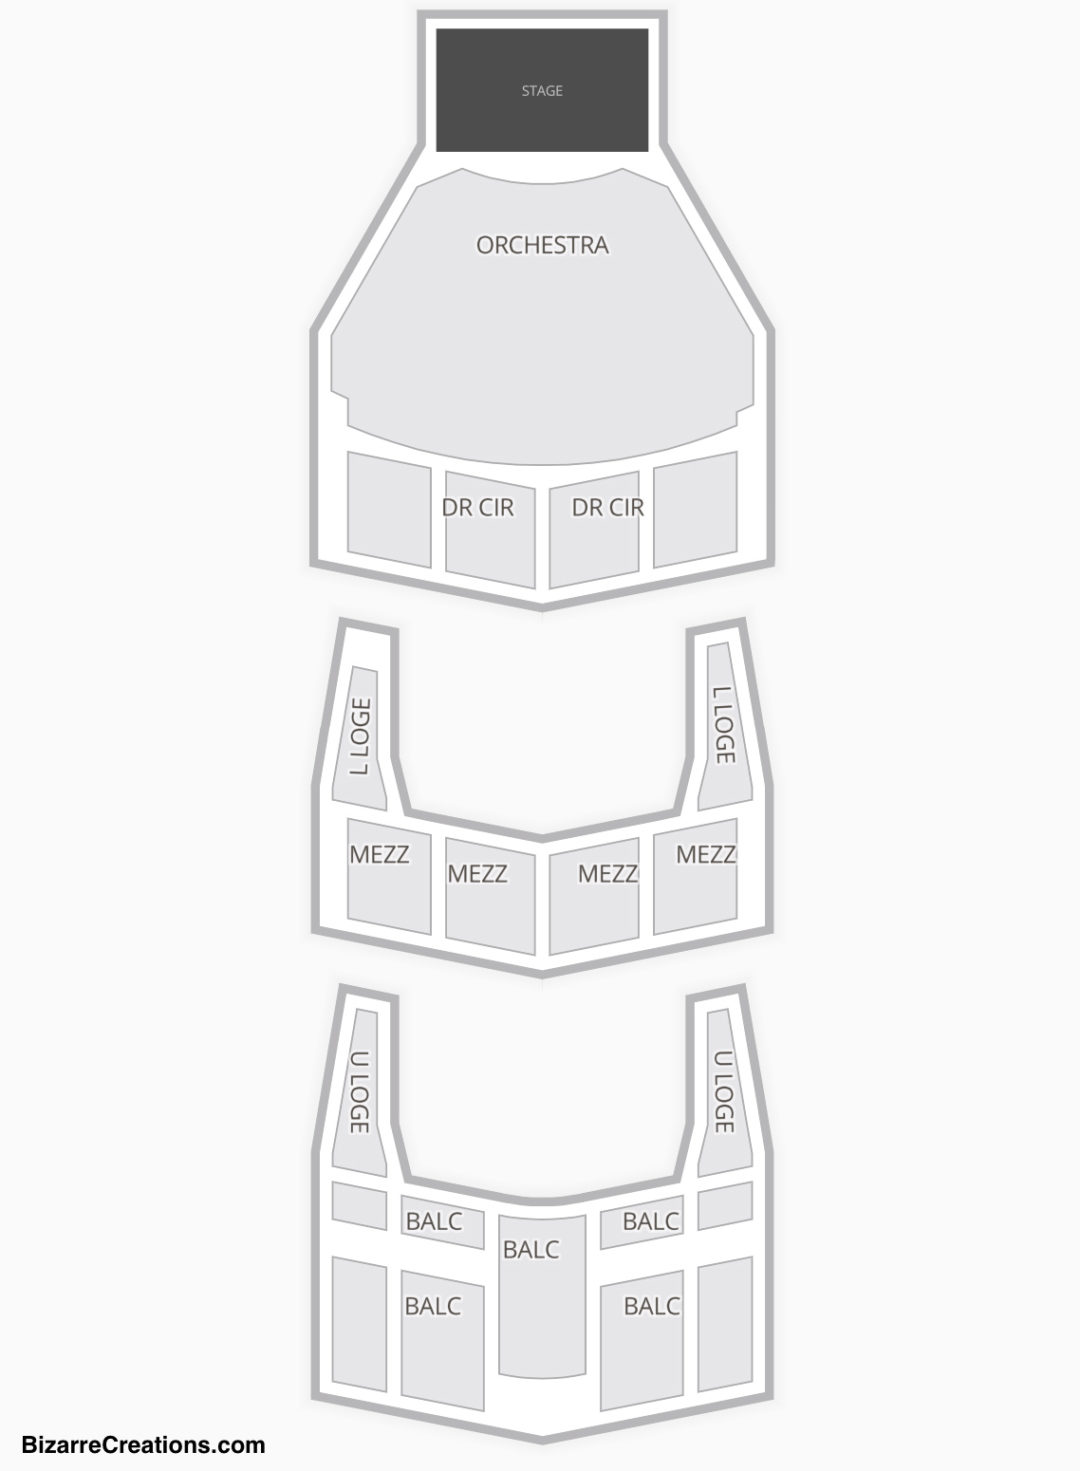 San Diego Civic Theatre Seating Chart Seating Charts & Tickets